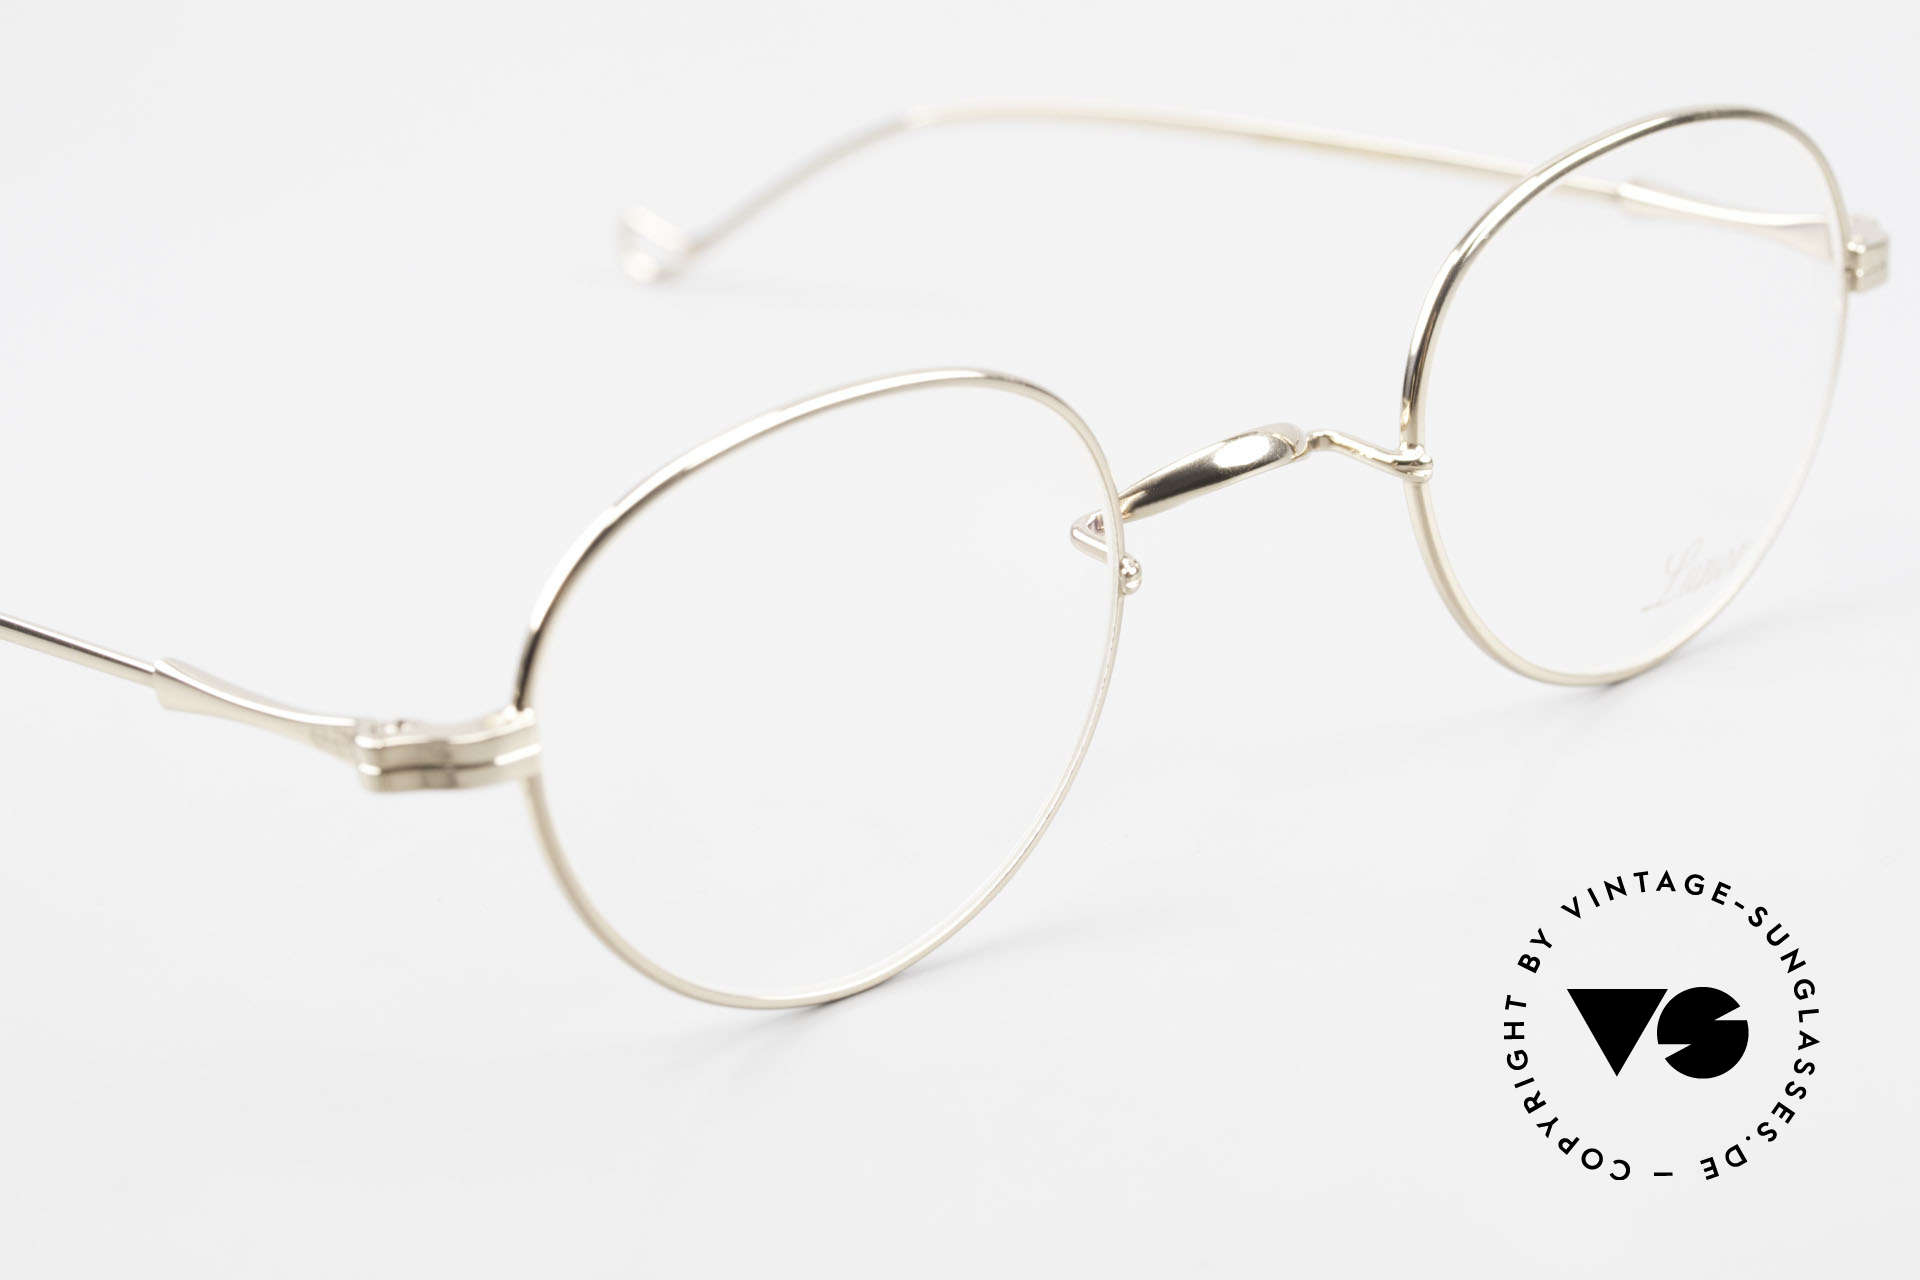 Lunor II 22 Lunor Eyeglasses Gold Plated, unworn RARITY for all lovers of quality from app. 1998, Made for Men and Women